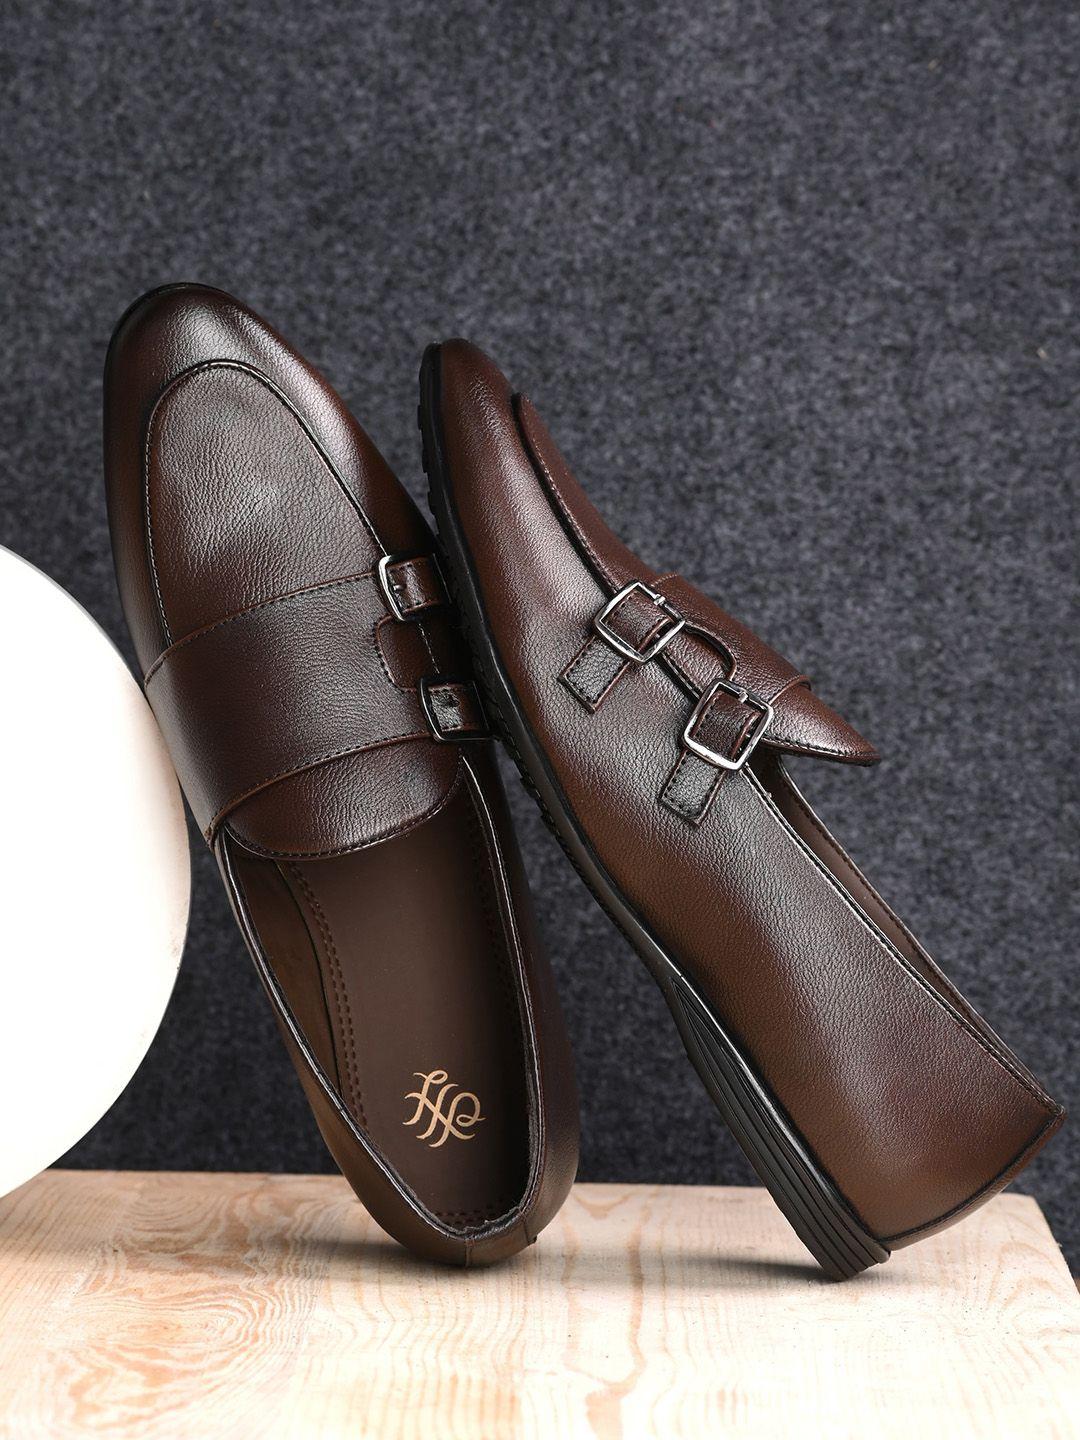 house of pataudi men slip on casual monk shoes